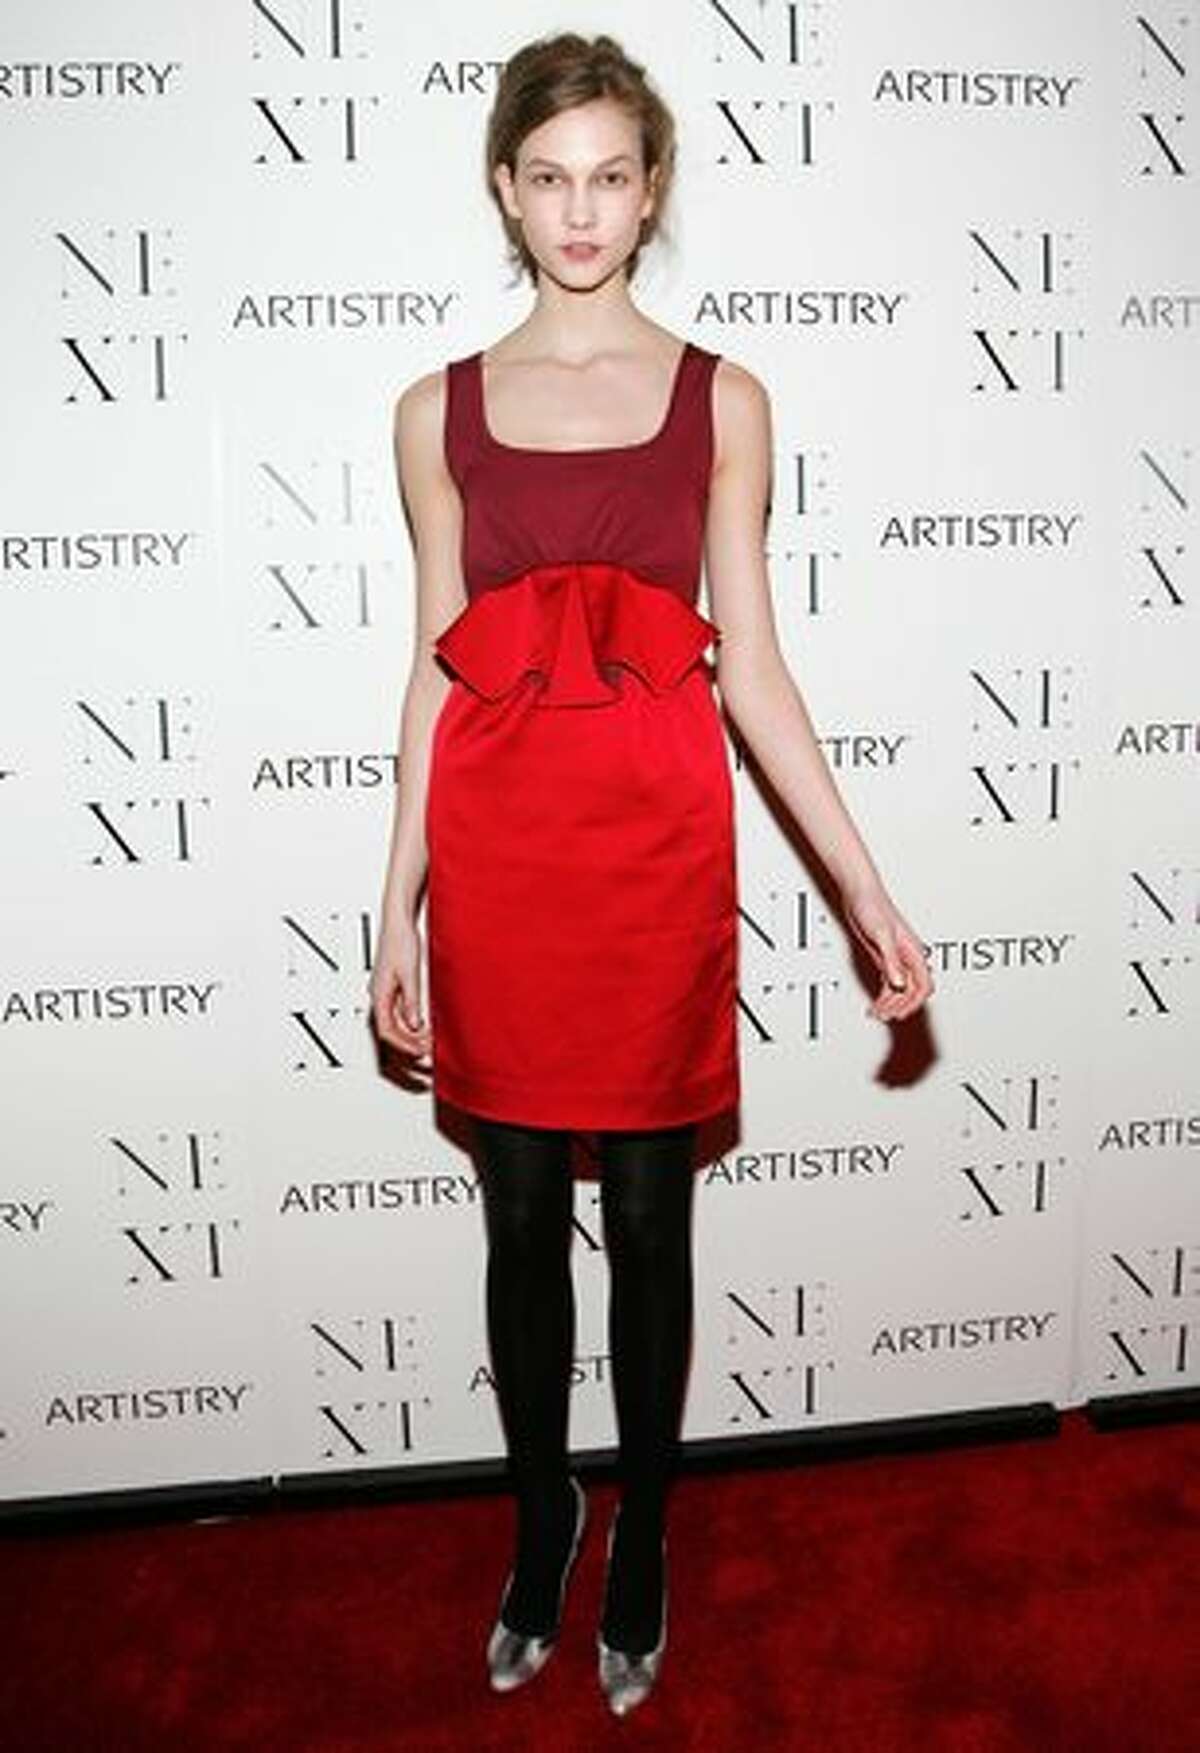 Model Karlie Kloss is seen in this photo from an event in New York on Saturday.